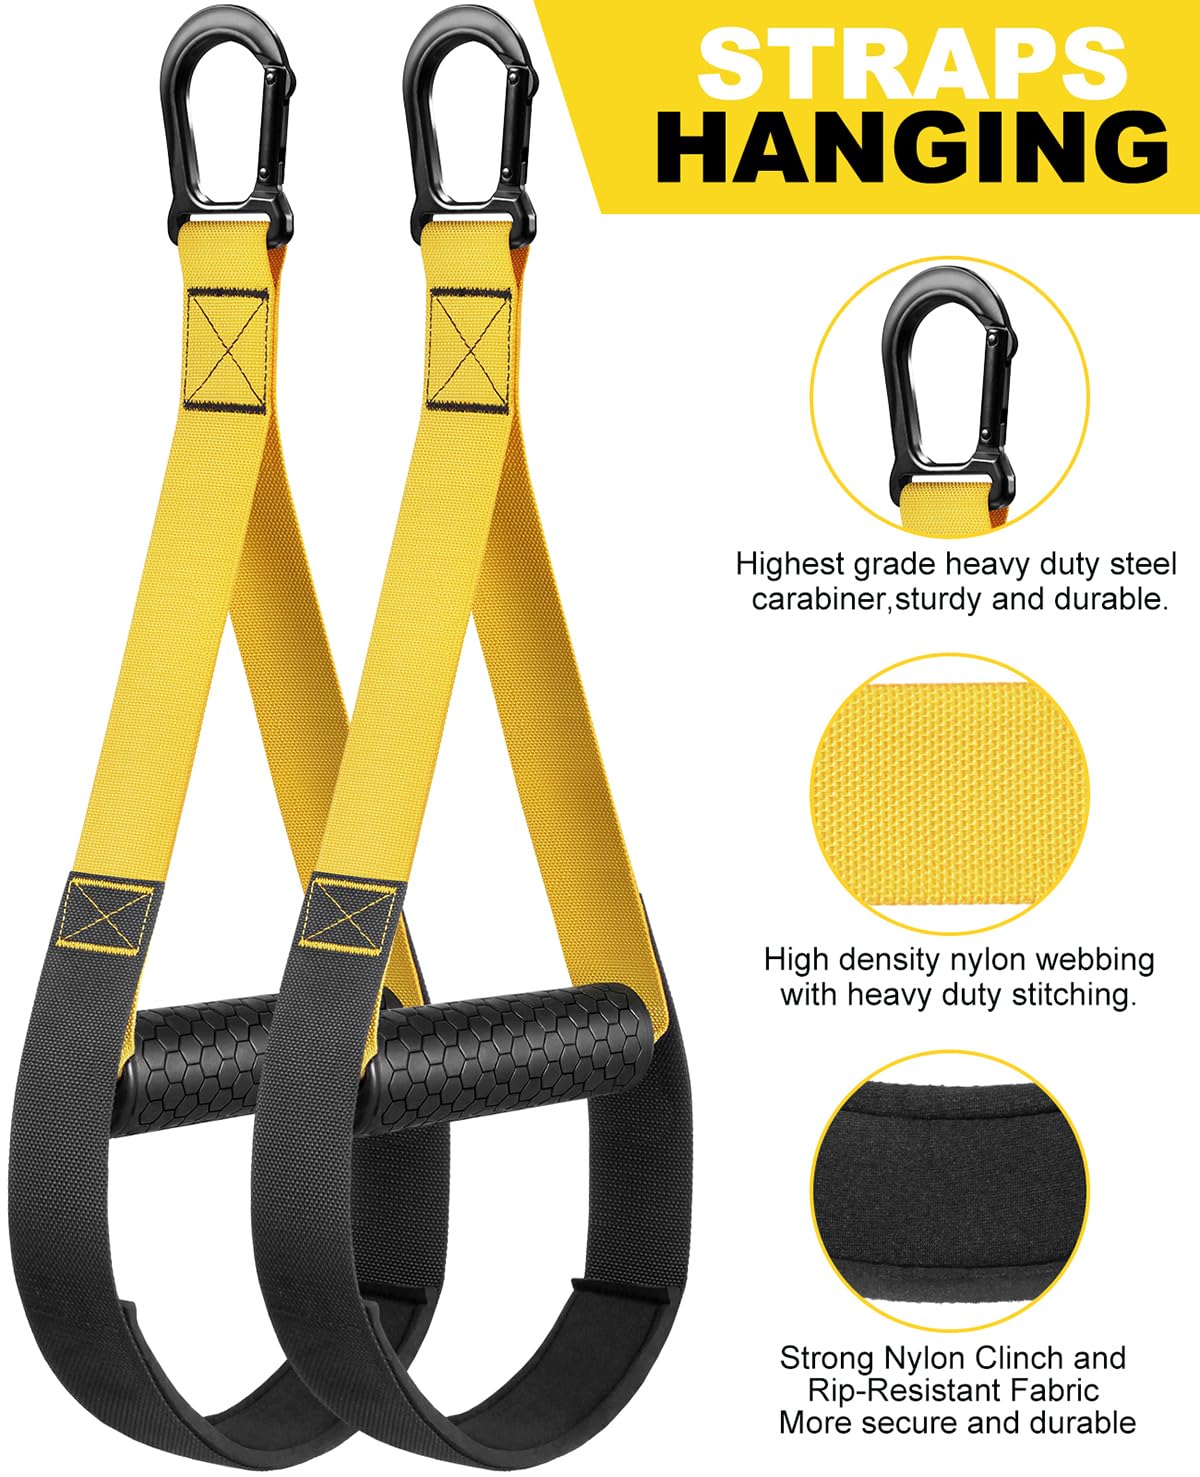 Home Resistance Training Kit, Resistance Trainer Exercise Straps with  Handles, Door Anchor and Carrying Bag for Home Gym, Bodyweight Resistance